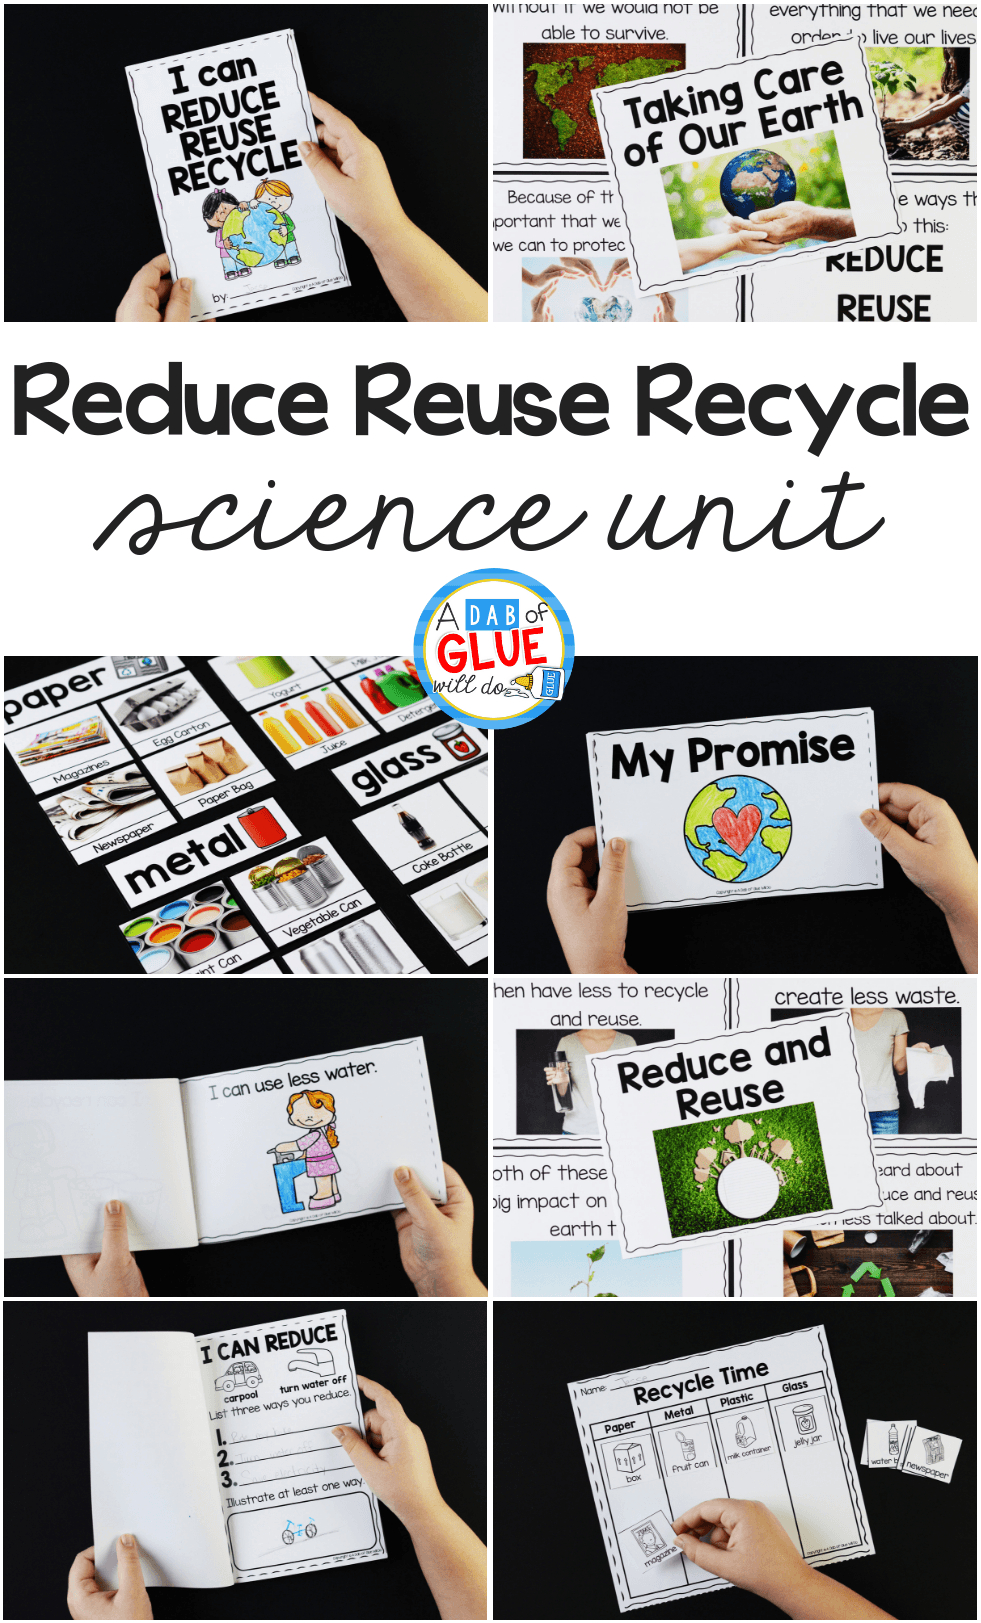 Reduce, Reuse, Recycle Science Unit - A Dab Of Glue Will Do